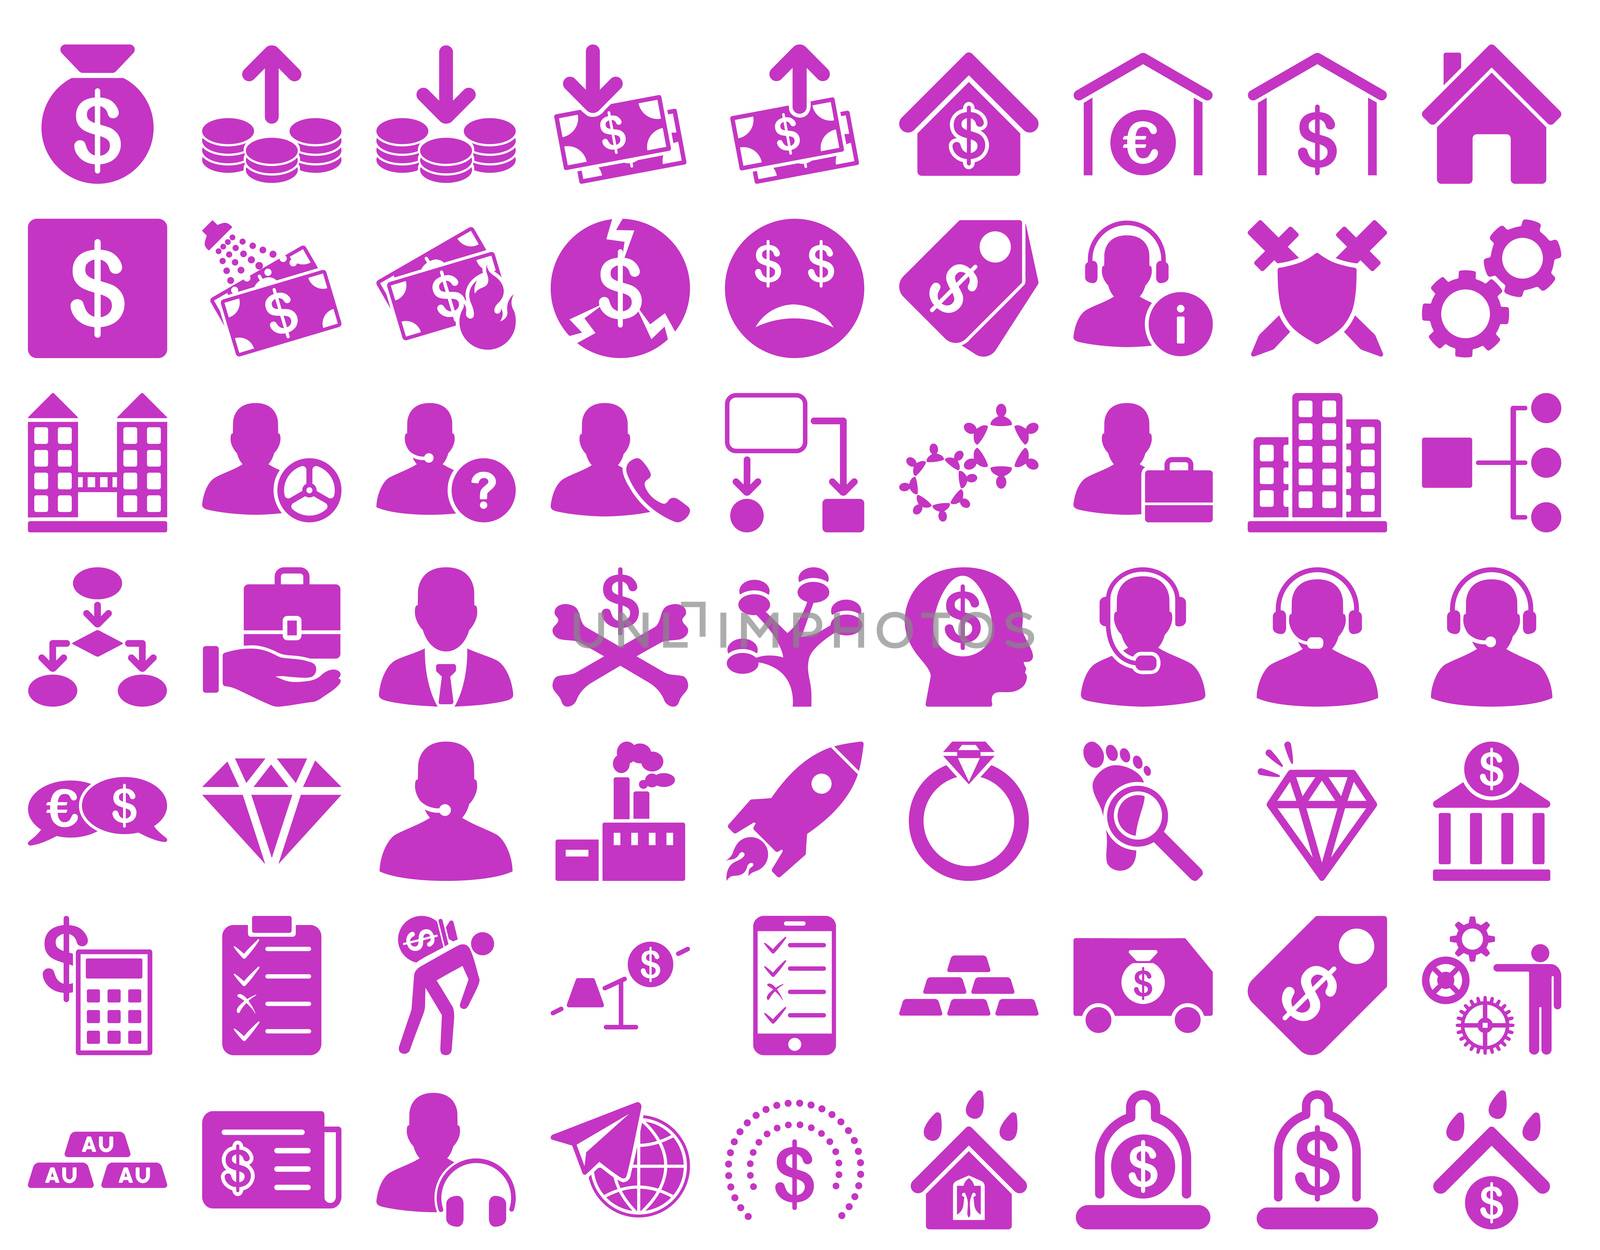 Commerce Icons. These flat icons use violet color. Raster images are isolated on a white background.